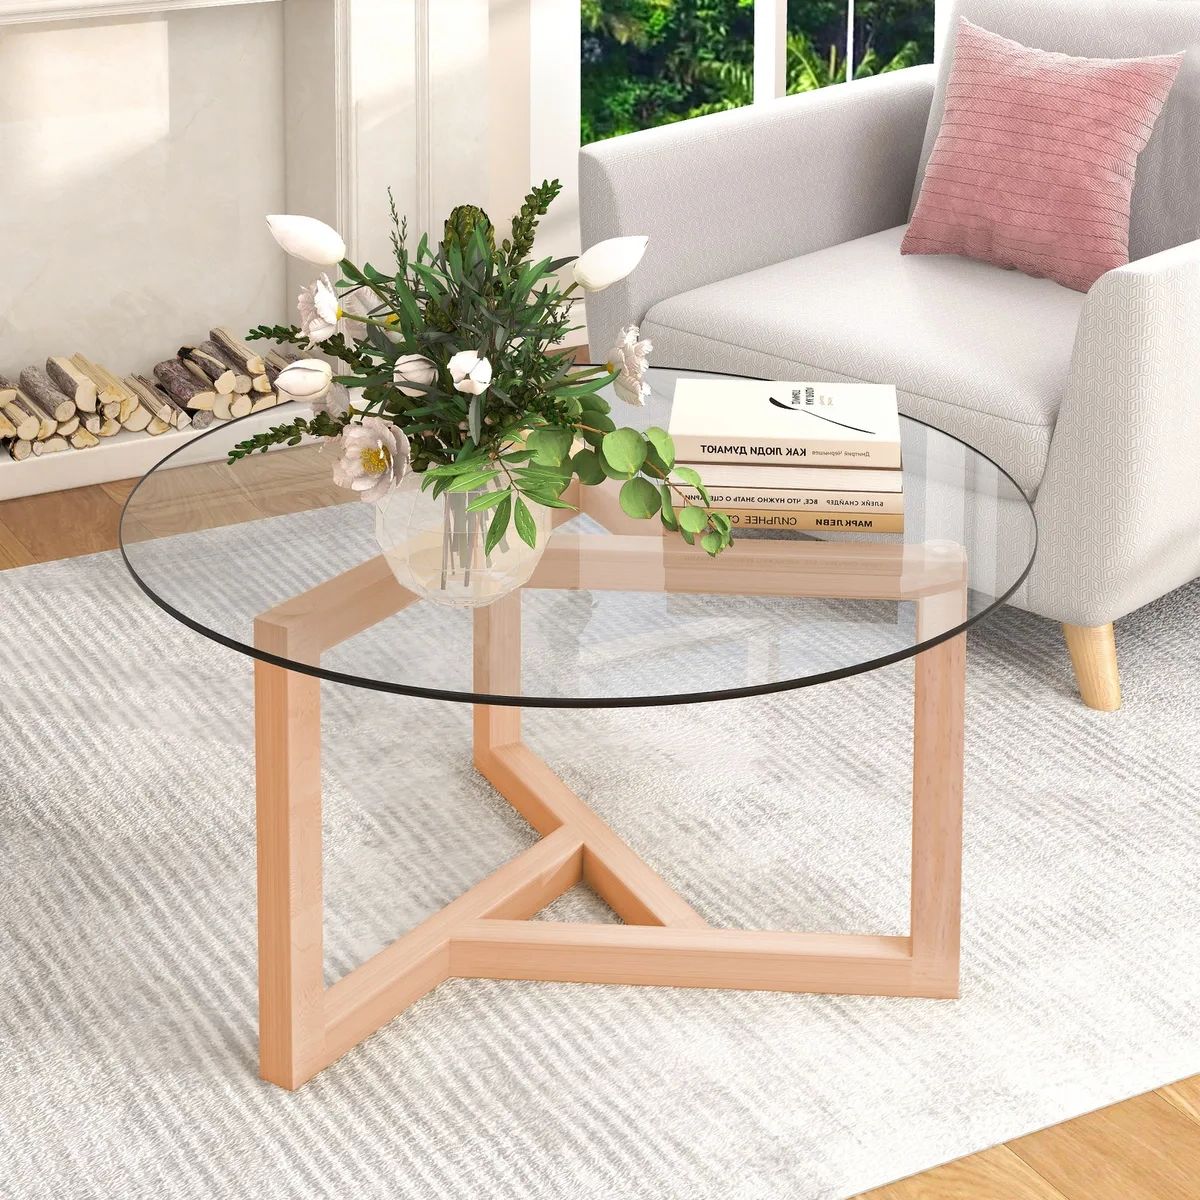 Ebay Throughout Latest Wood Tempered Glass Top Coffee Tables (Photo 8 of 10)